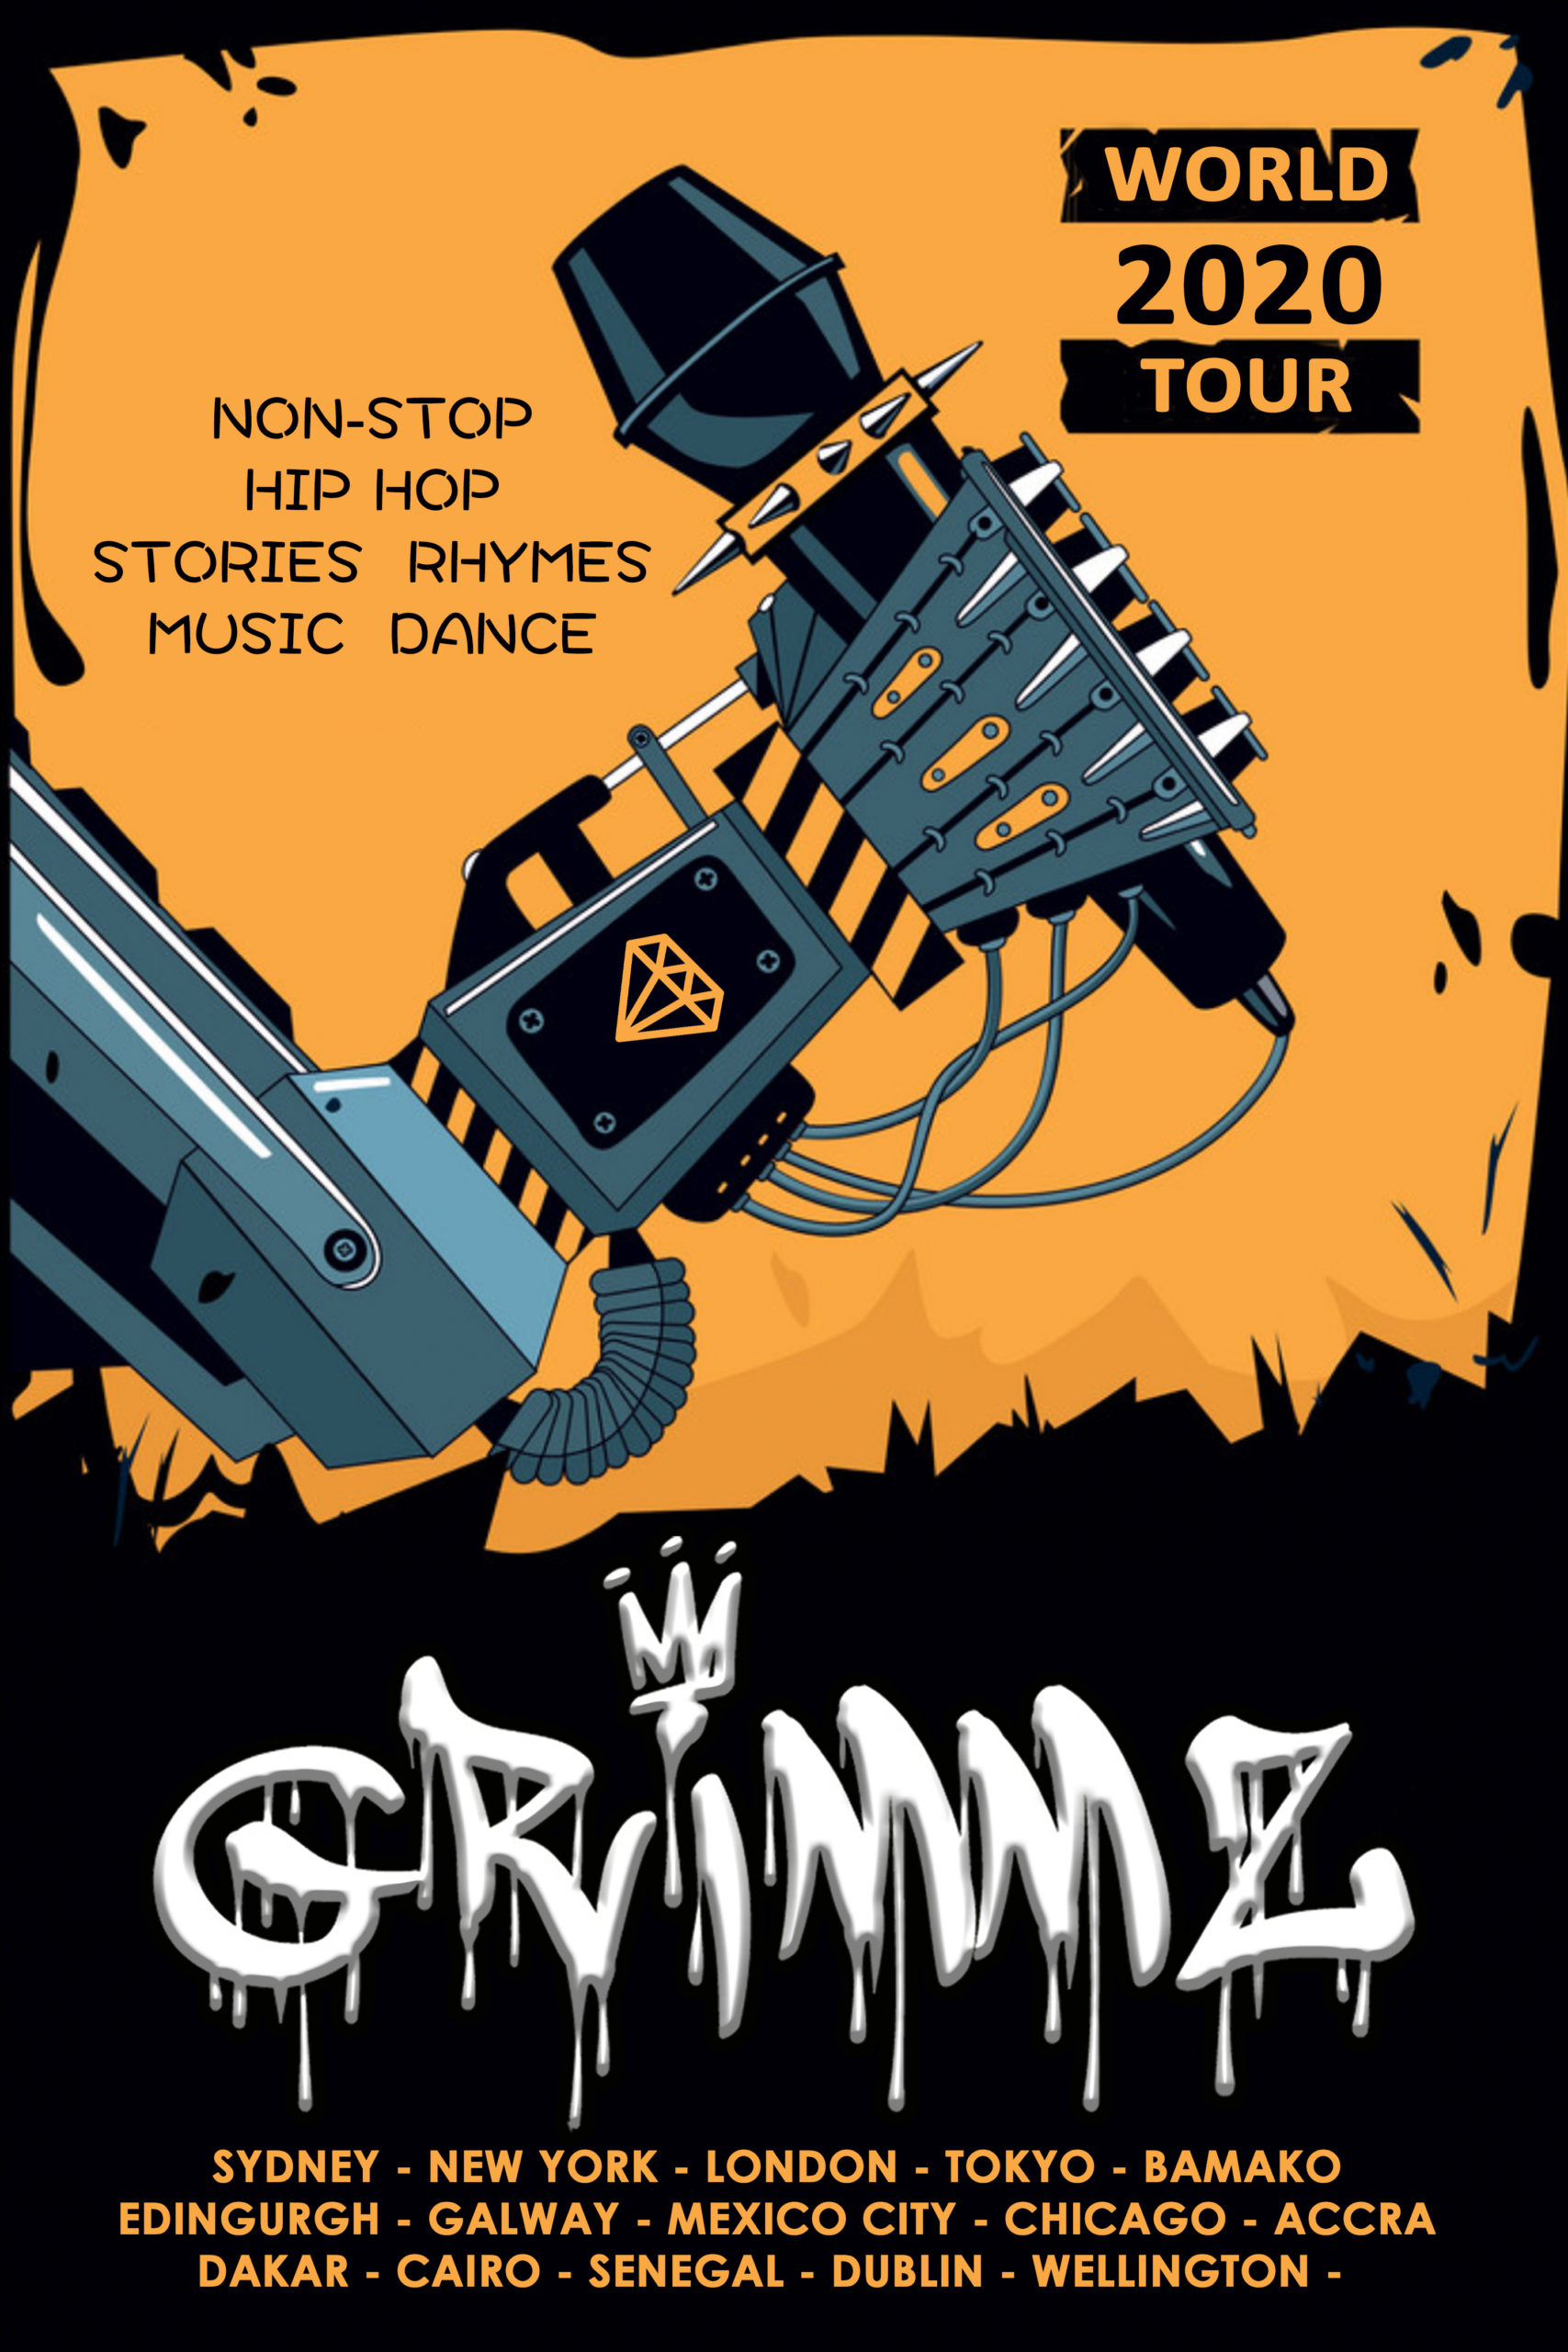 GRIMMZ lobby poster #2